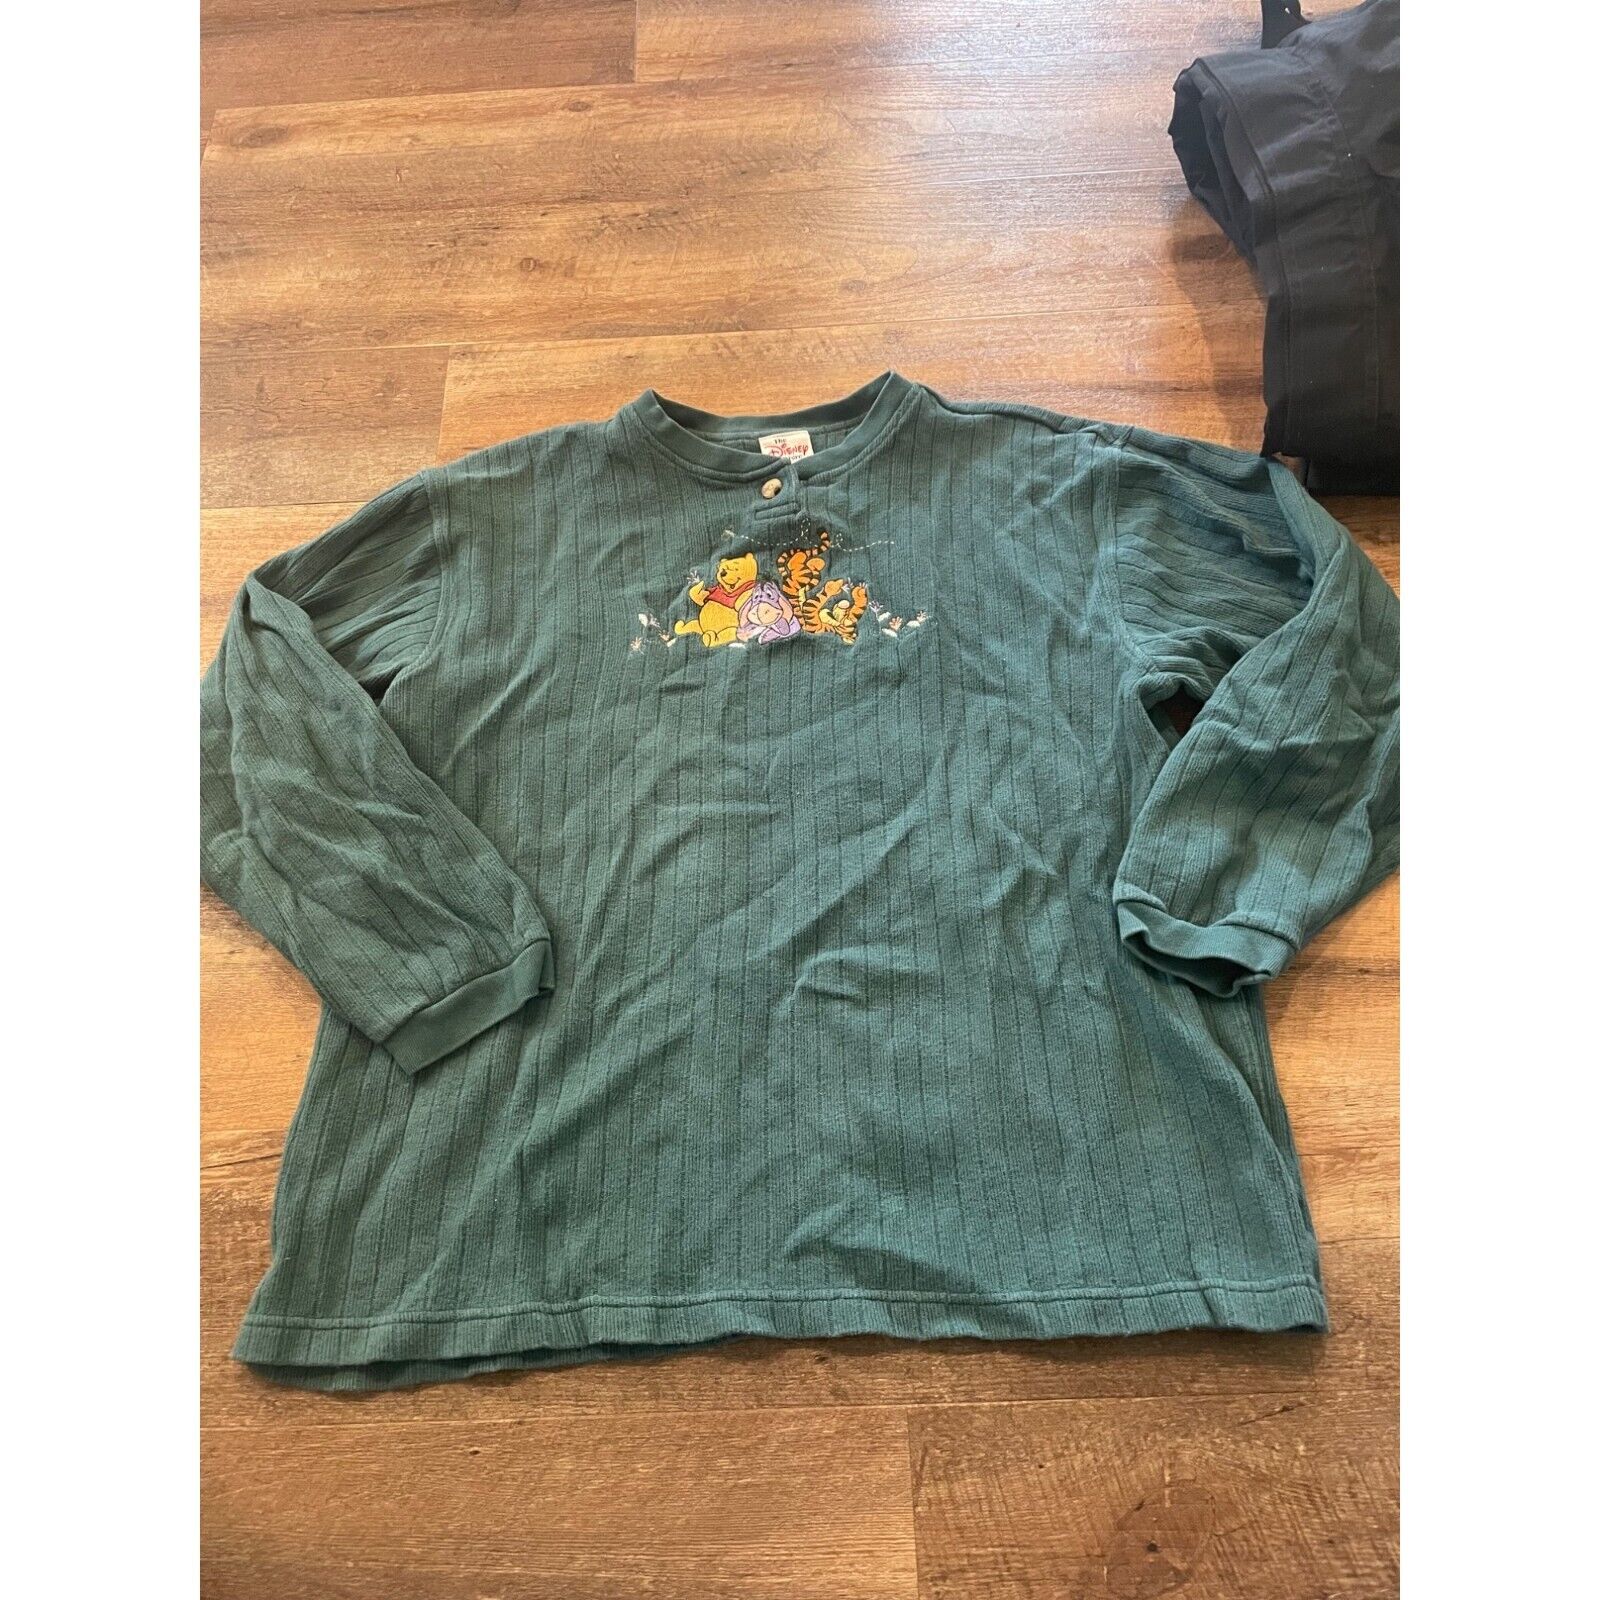 Vintage The Disney Store Whinnie The Pooh Green Long Sleeve Shirt Large 22x25